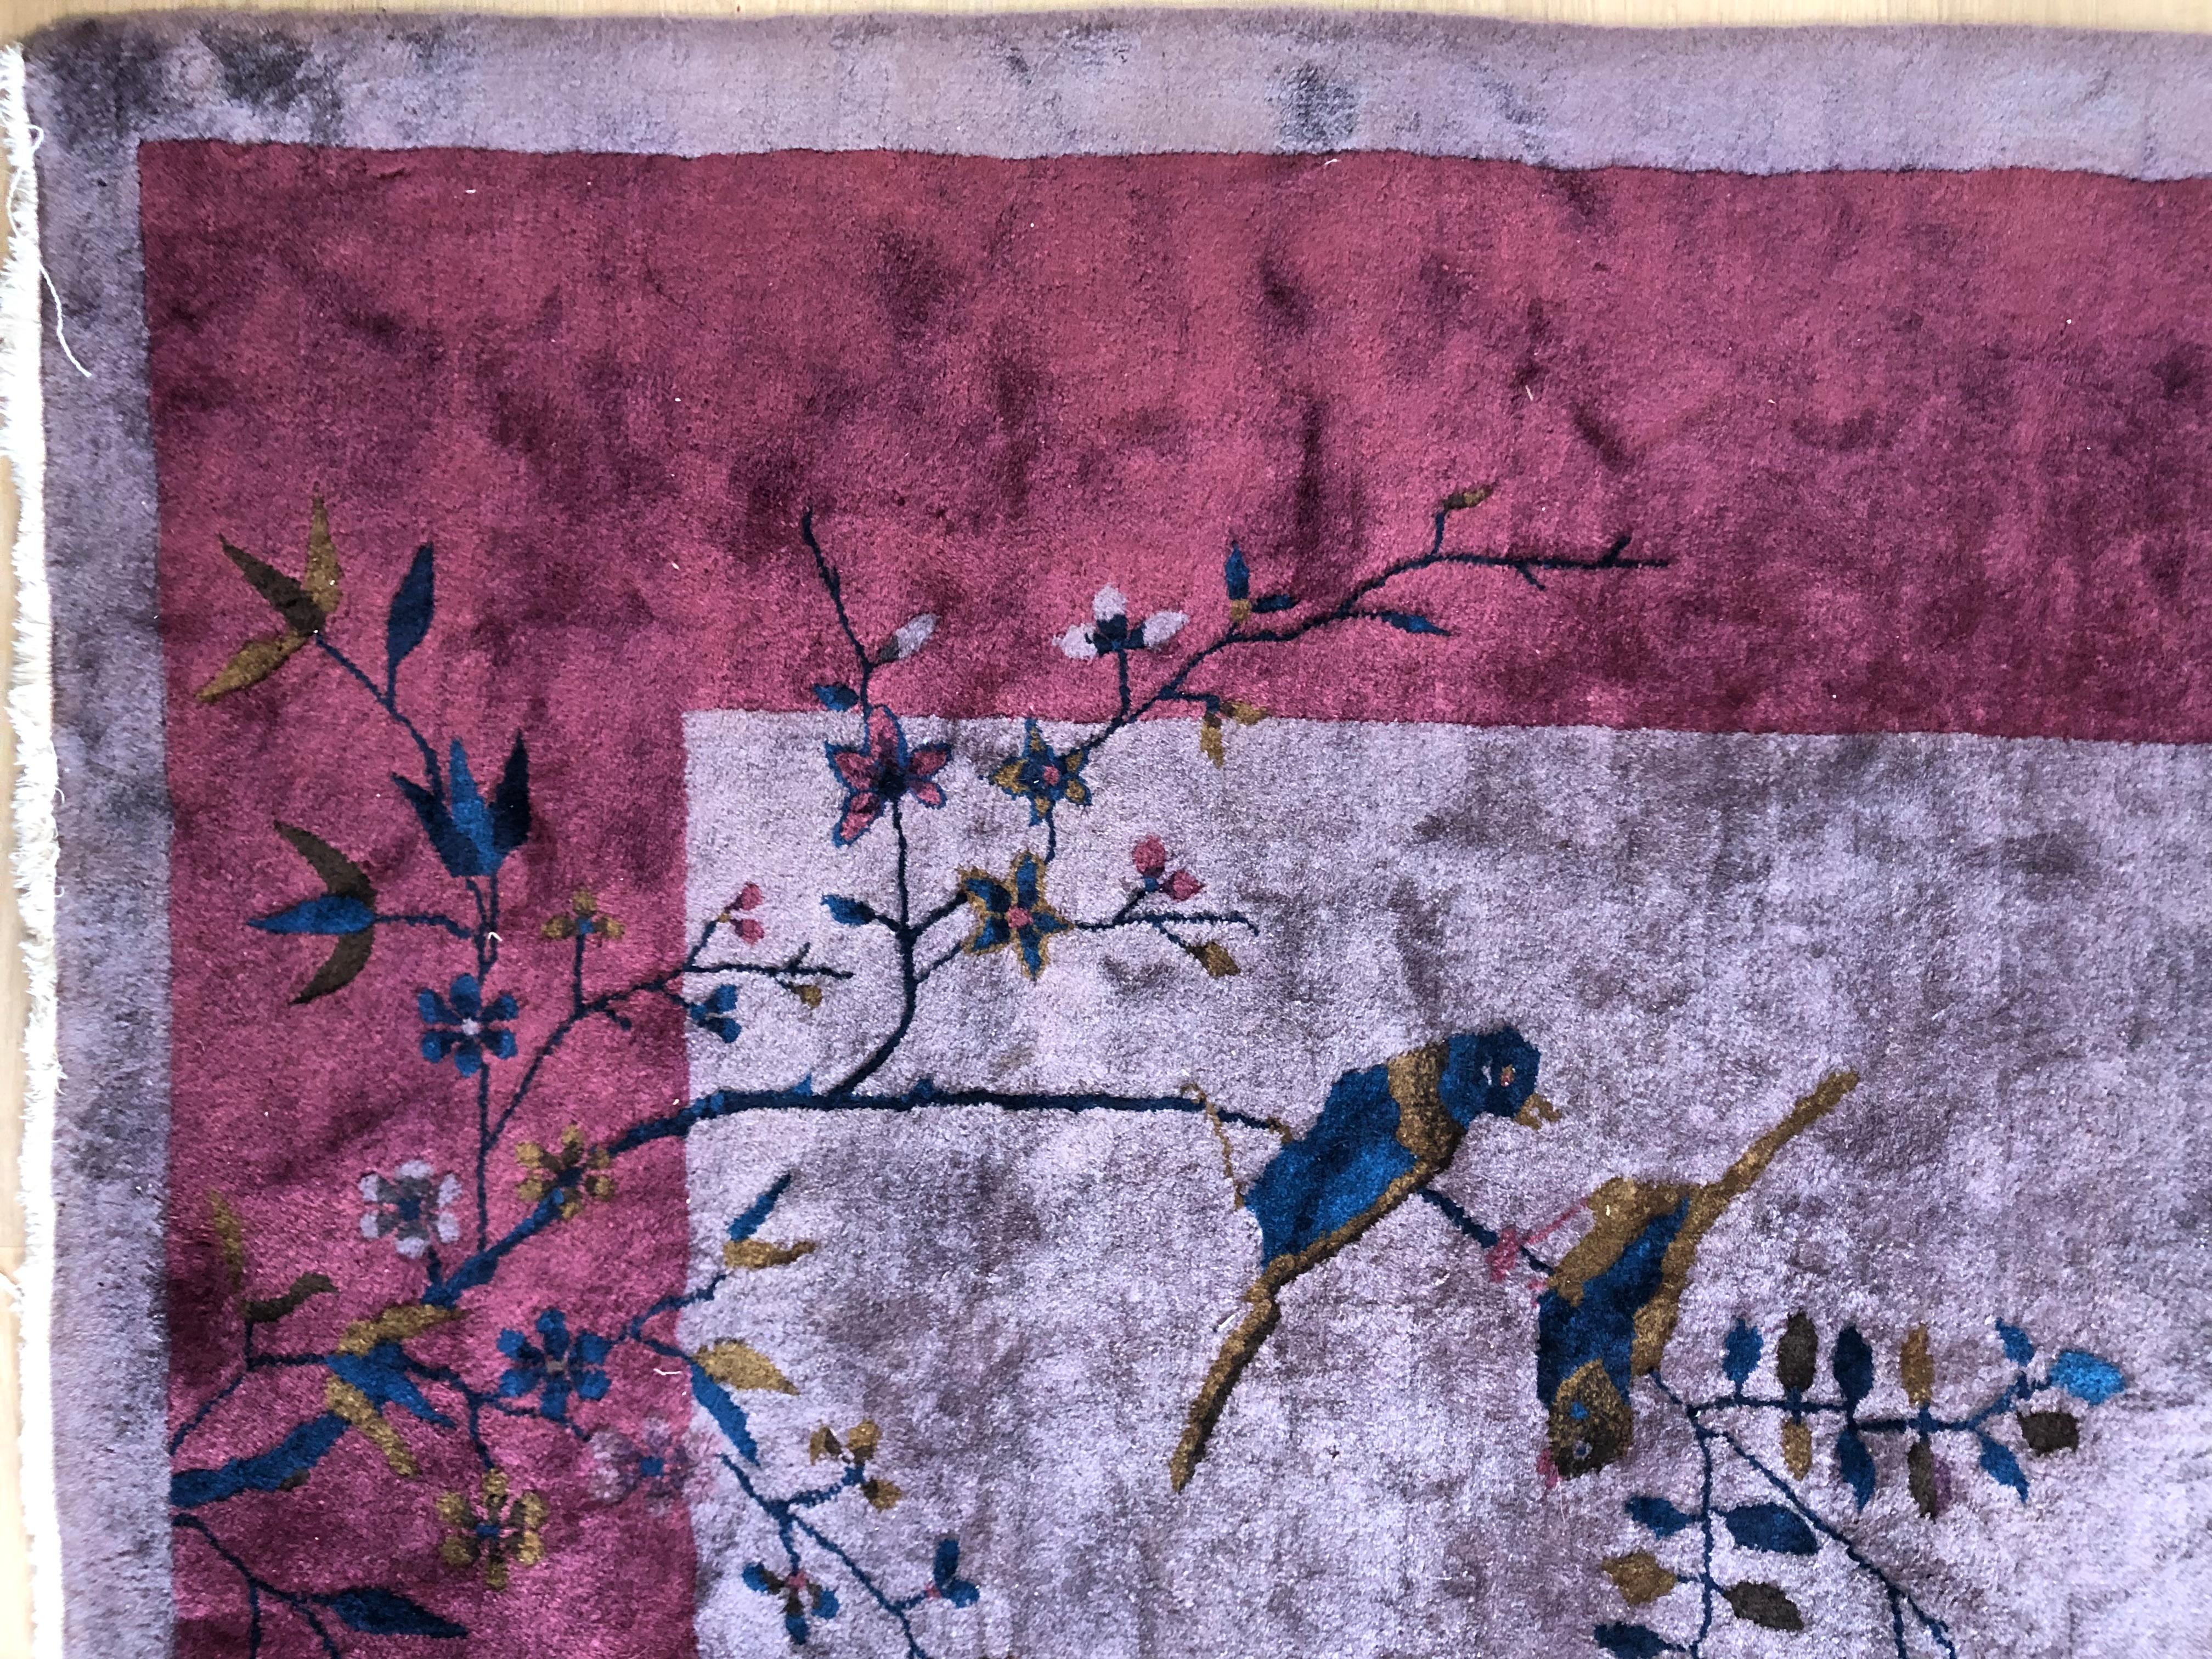 Spectacular Chinese Art Deco carpet with unusual violet ground and mulberry border, the outer edges with nature details, including flowers, insects, butterflies, and birds. Circa 1930.
This rug has a very unusual colour combination with a lovely